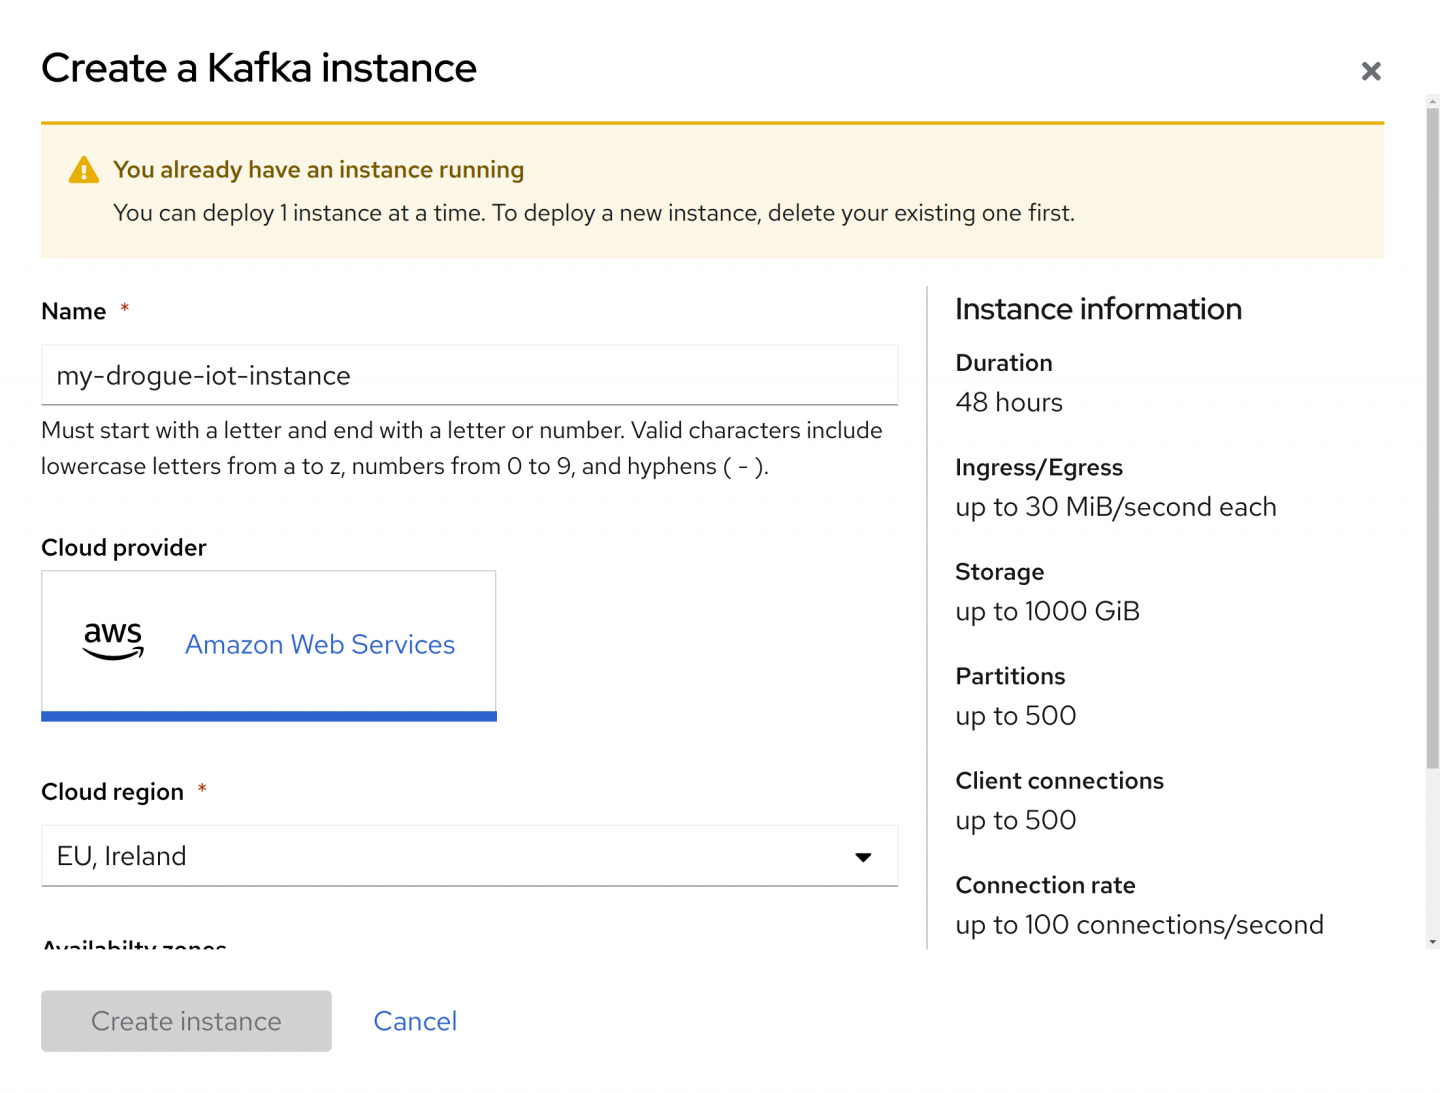 The user interface allows you to create a Kafka instance and assign a name.